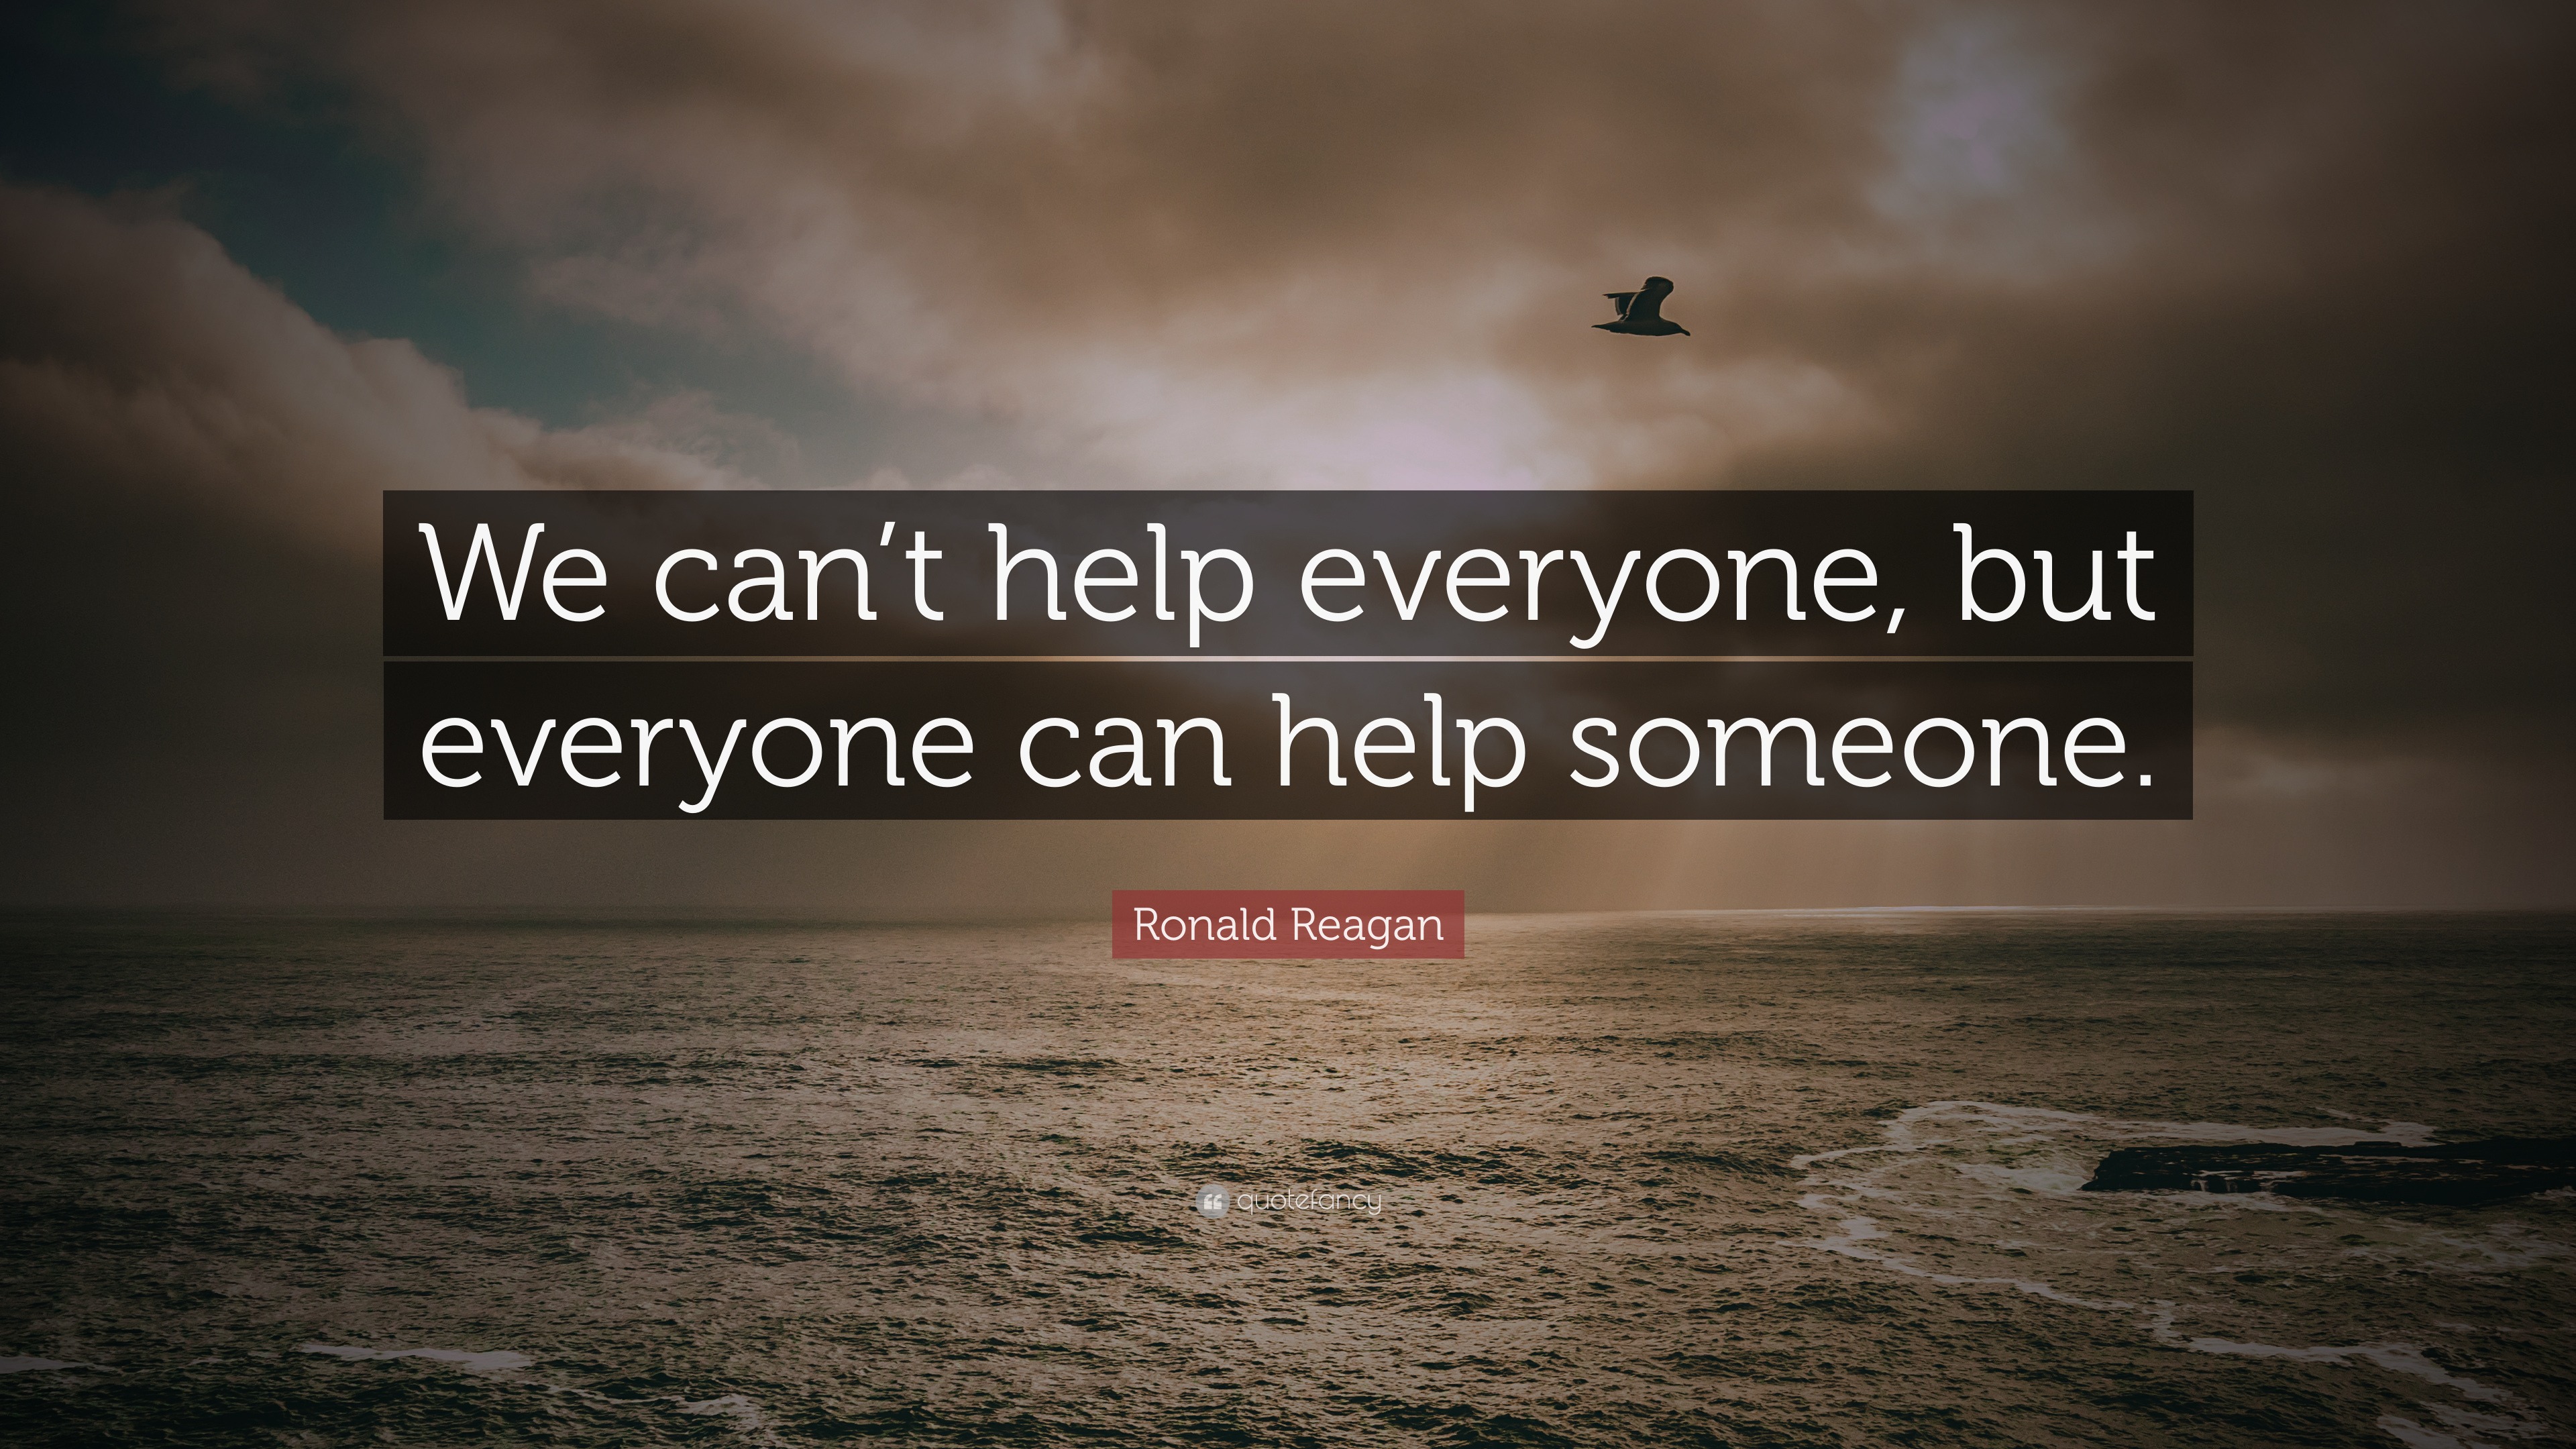 Ronald Reagan Quote: “We can’t help everyone, but everyone can help ...